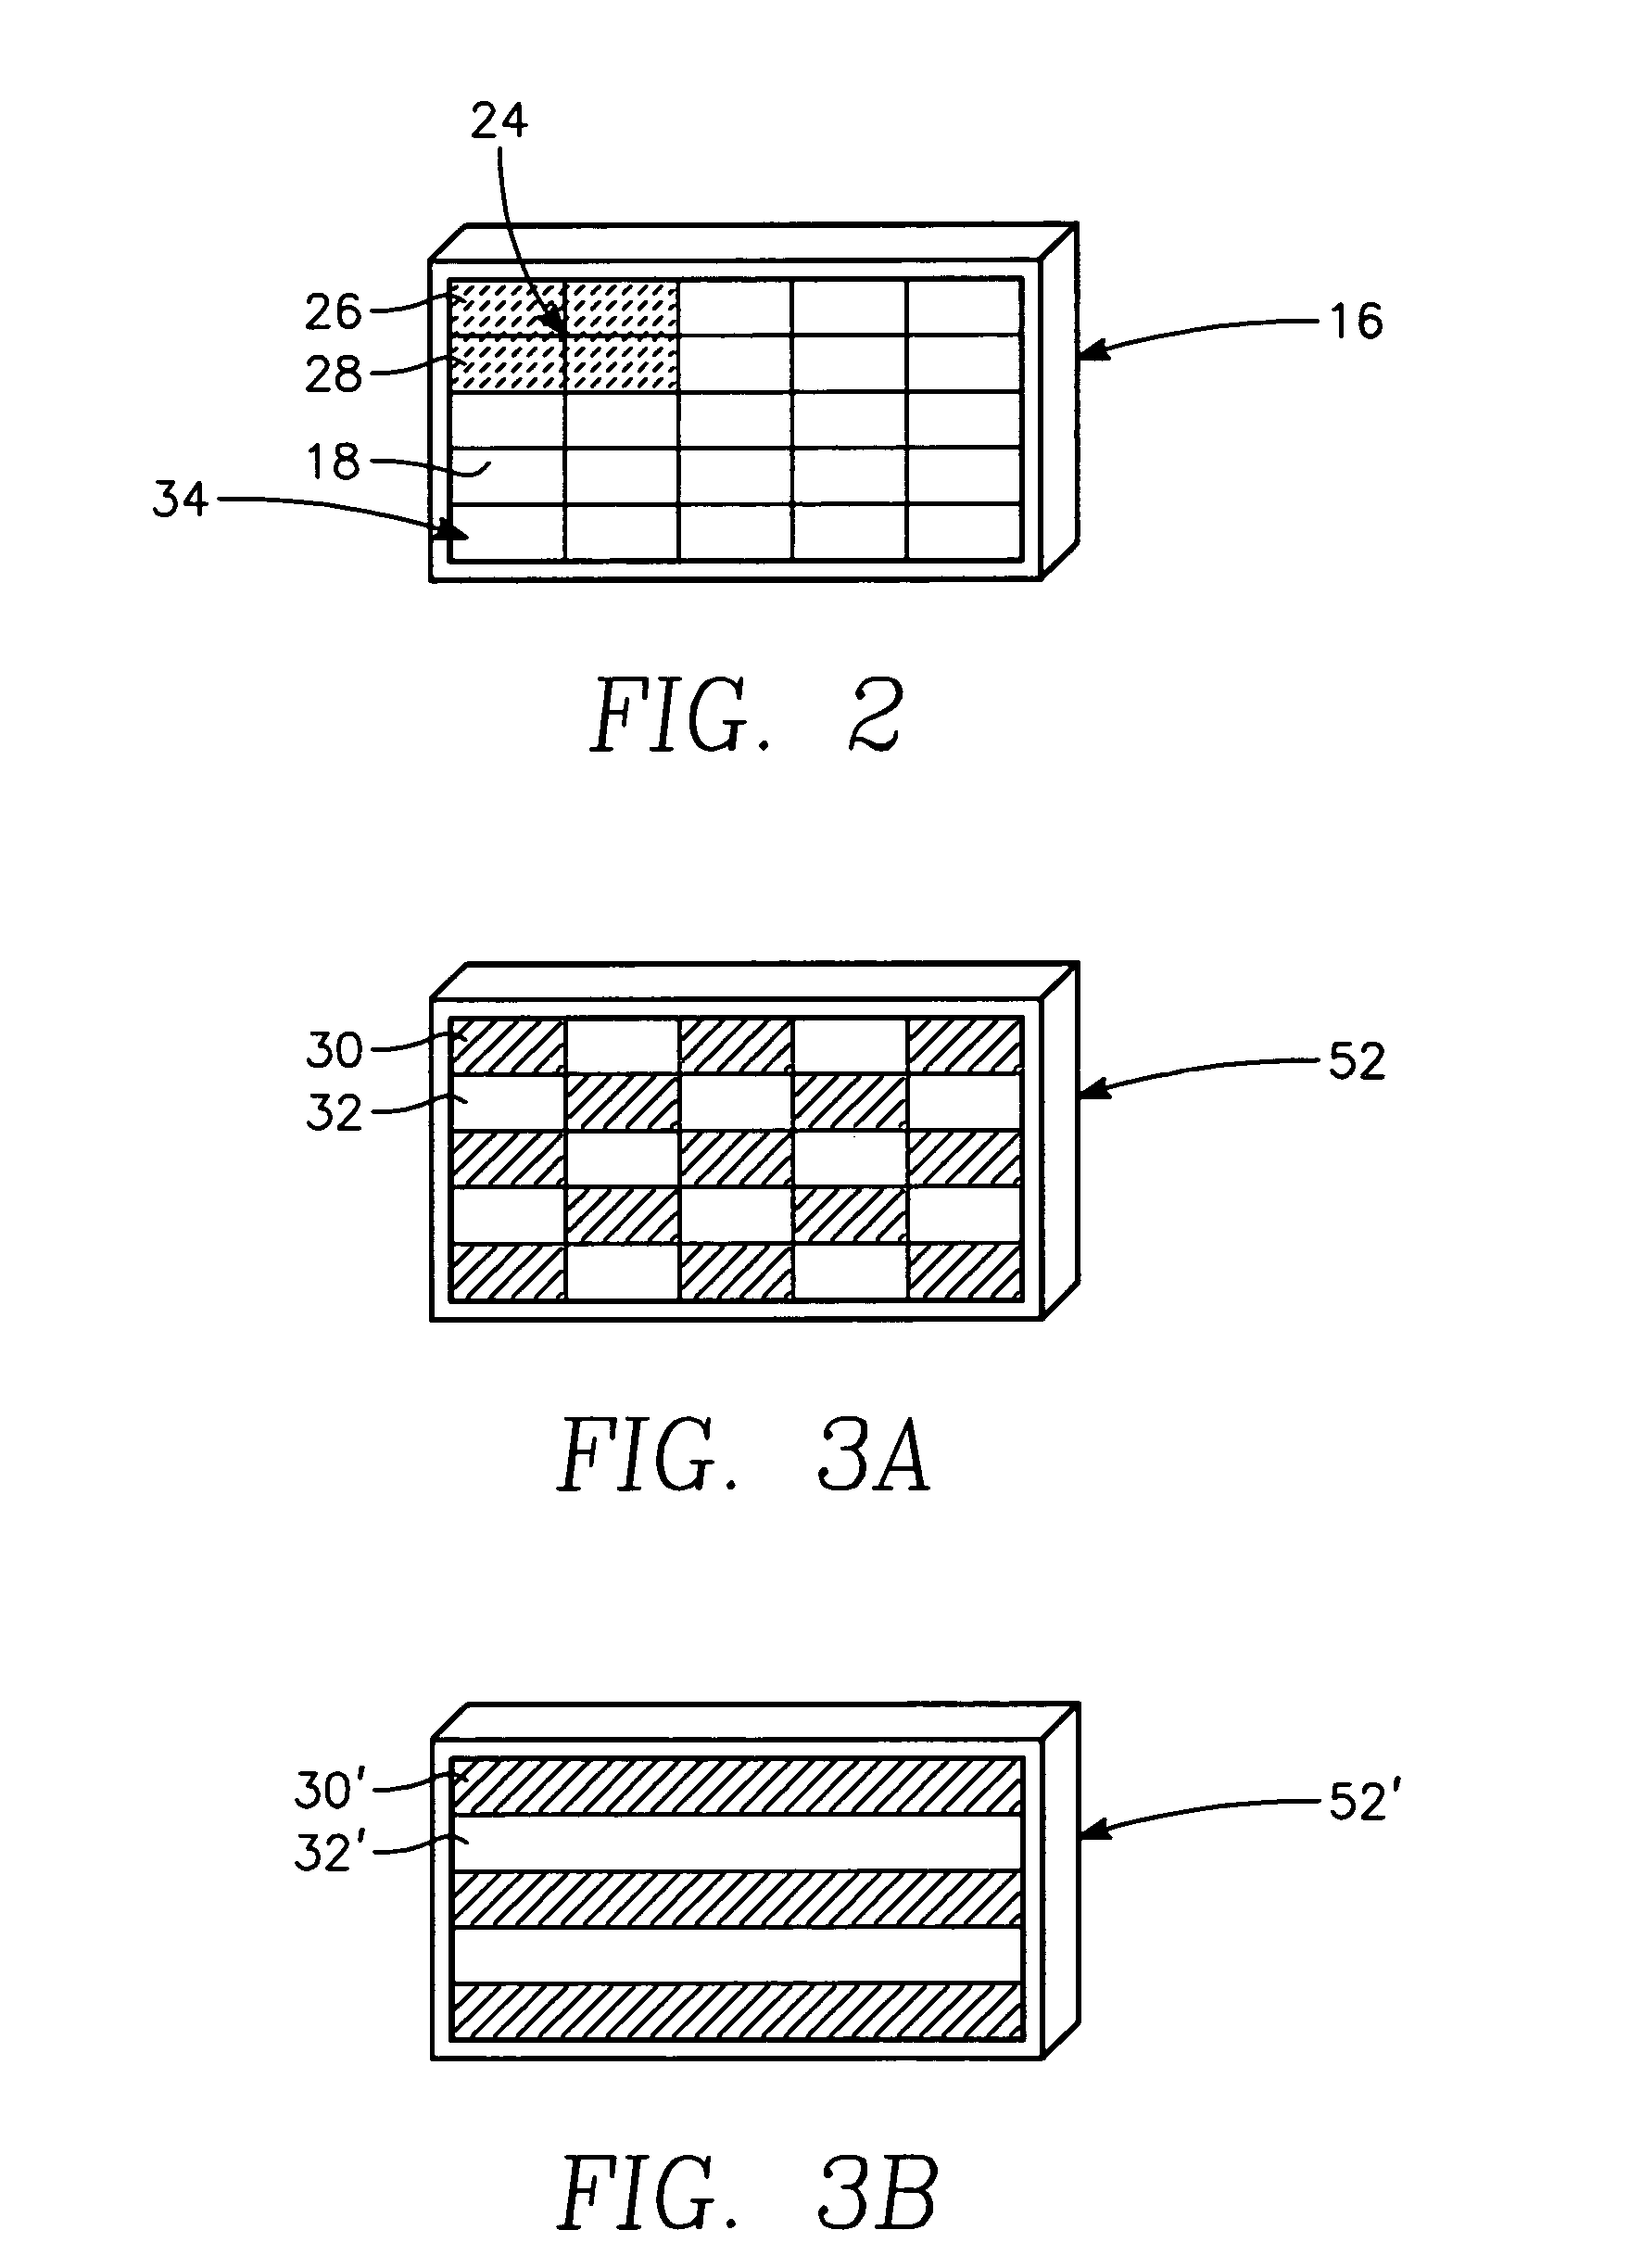 Multi-color infrared imaging device